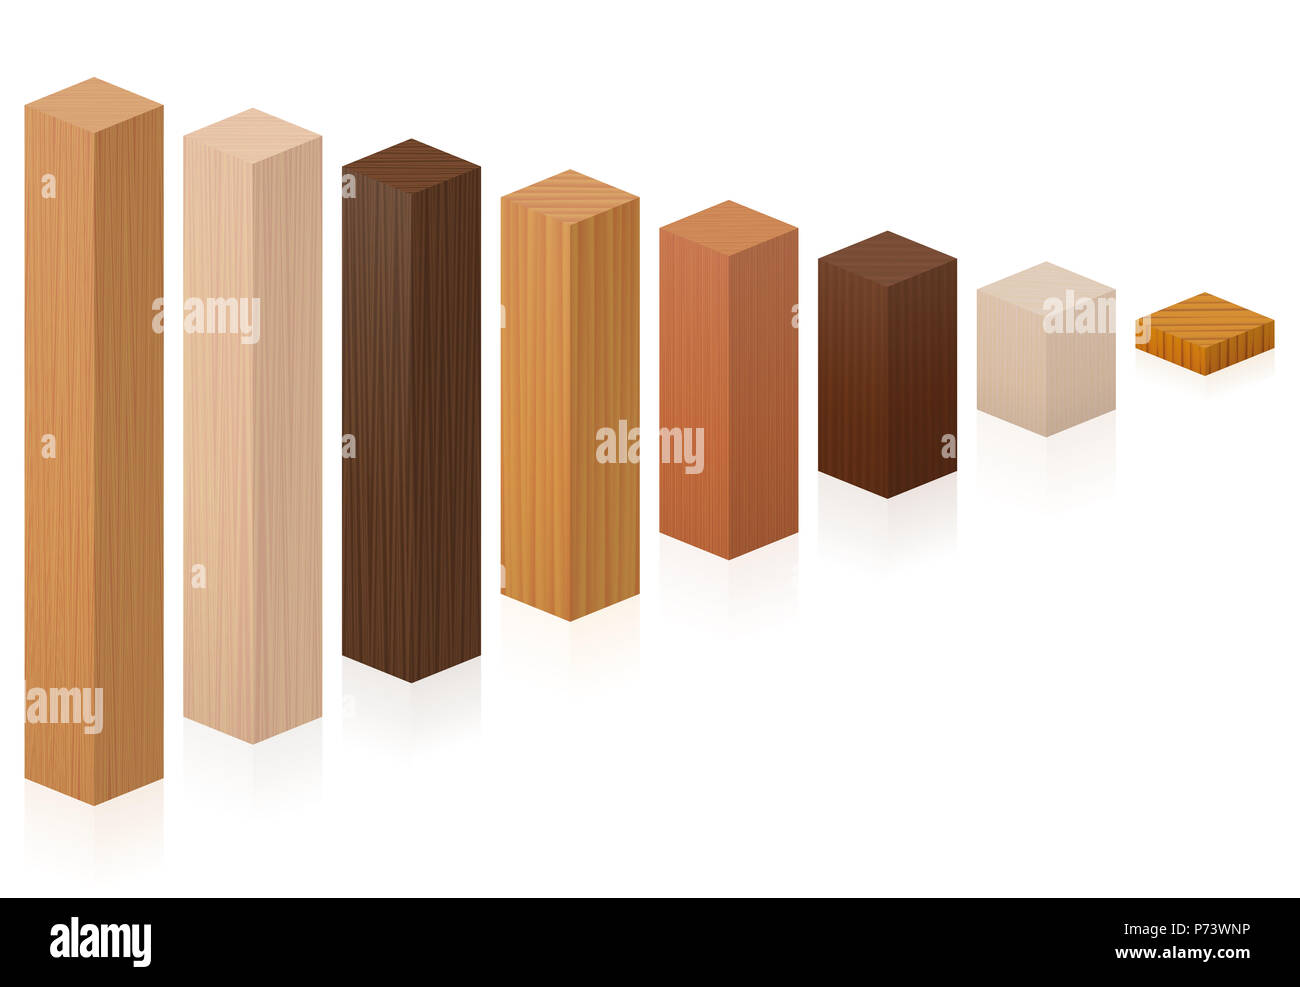 Pieces of different wood types getting shorter - wooden blocks from various trees - illustration on white background. Stock Photo